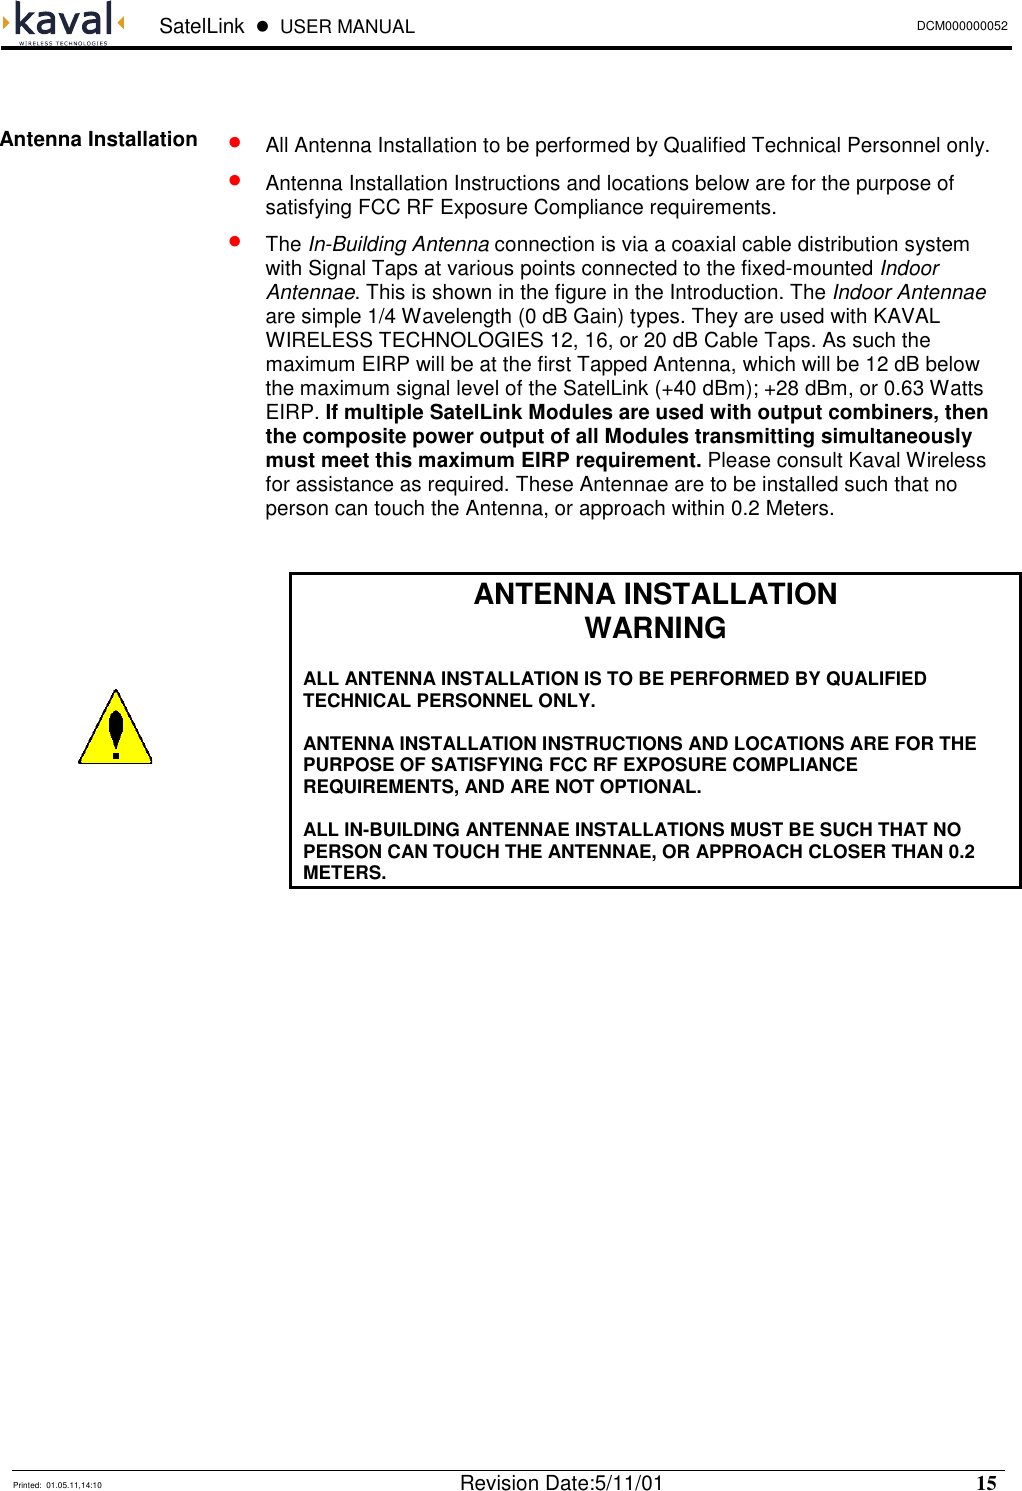  SatelLink  !  USER MANUAL DCM000000052   Printed:  01.05.11,14:10  Revision Date:5/11/01   15    •   All Antenna Installation to be performed by Qualified Technical Personnel only. •   Antenna Installation Instructions and locations below are for the purpose of satisfying FCC RF Exposure Compliance requirements. •  The In-Building Antenna connection is via a coaxial cable distribution system with Signal Taps at various points connected to the fixed-mounted Indoor Antennae. This is shown in the figure in the Introduction. The Indoor Antennae are simple 1/4 Wavelength (0 dB Gain) types. They are used with KAVAL WIRELESS TECHNOLOGIES 12, 16, or 20 dB Cable Taps. As such the maximum EIRP will be at the first Tapped Antenna, which will be 12 dB below the maximum signal level of the SatelLink (+40 dBm); +28 dBm, or 0.63 Watts EIRP. If multiple SatelLink Modules are used with output combiners, then the composite power output of all Modules transmitting simultaneously must meet this maximum EIRP requirement. Please consult Kaval Wireless for assistance as required. These Antennae are to be installed such that no person can touch the Antenna, or approach within 0.2 Meters.   ANTENNA INSTALLATION WARNING  ALL ANTENNA INSTALLATION IS TO BE PERFORMED BY QUALIFIED TECHNICAL PERSONNEL ONLY.  ANTENNA INSTALLATION INSTRUCTIONS AND LOCATIONS ARE FOR THE PURPOSE OF SATISFYING FCC RF EXPOSURE COMPLIANCE REQUIREMENTS, AND ARE NOT OPTIONAL.  ALL IN-BUILDING ANTENNAE INSTALLATIONS MUST BE SUCH THAT NO PERSON CAN TOUCH THE ANTENNAE, OR APPROACH CLOSER THAN 0.2 METERS.   Antenna Installation  